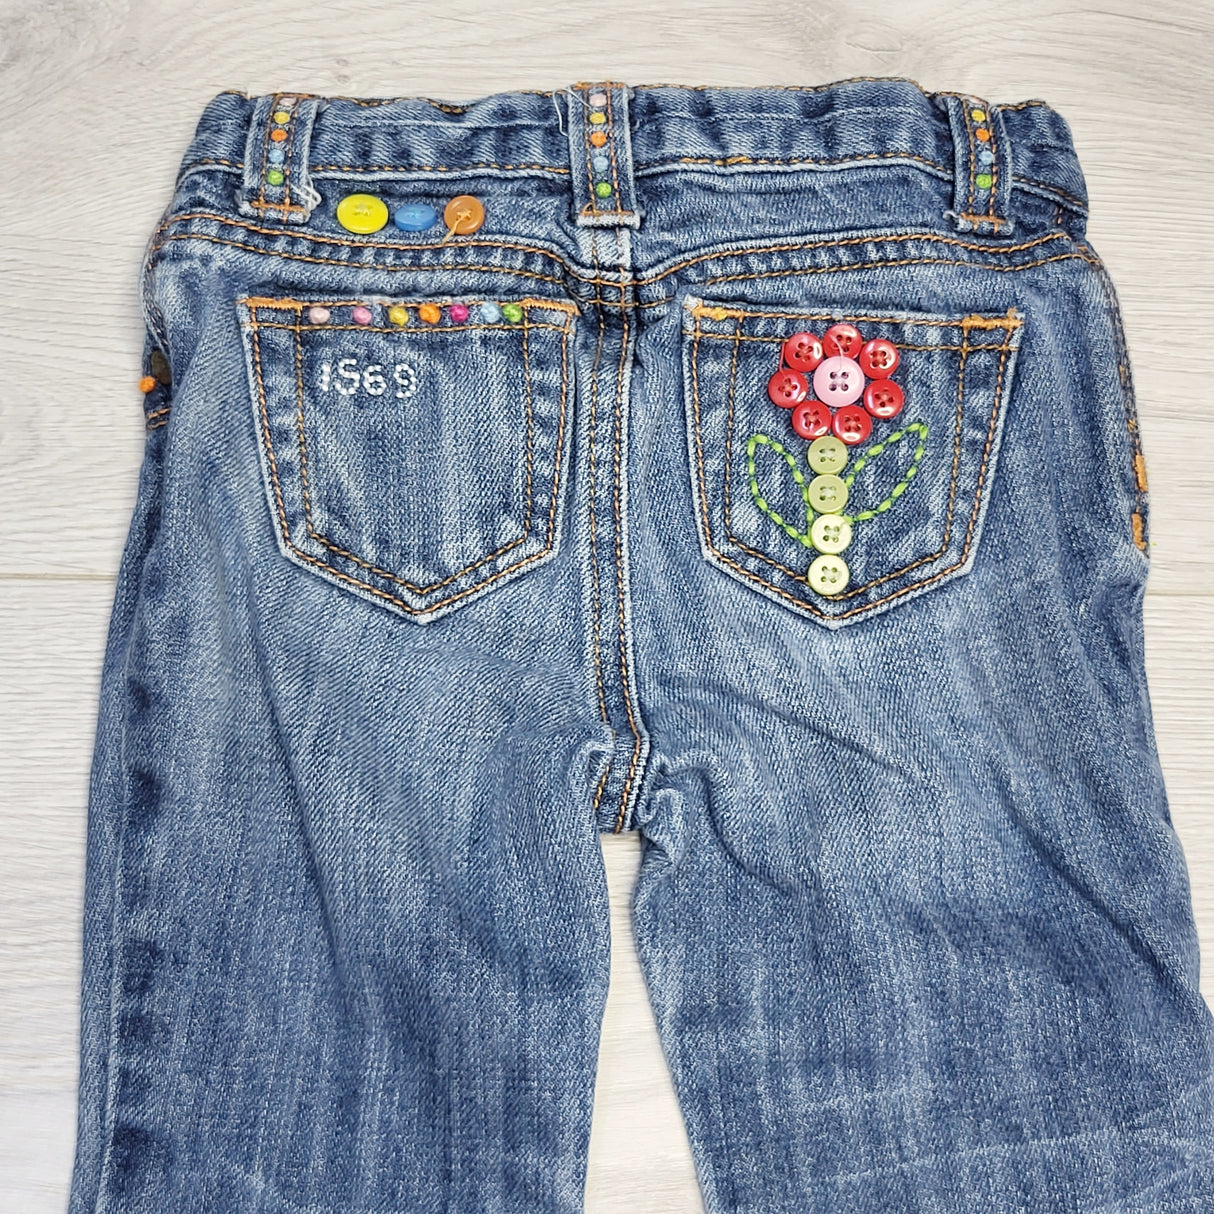 GDM1 - Gap distressed jeans with embellishments, size 18-24 months